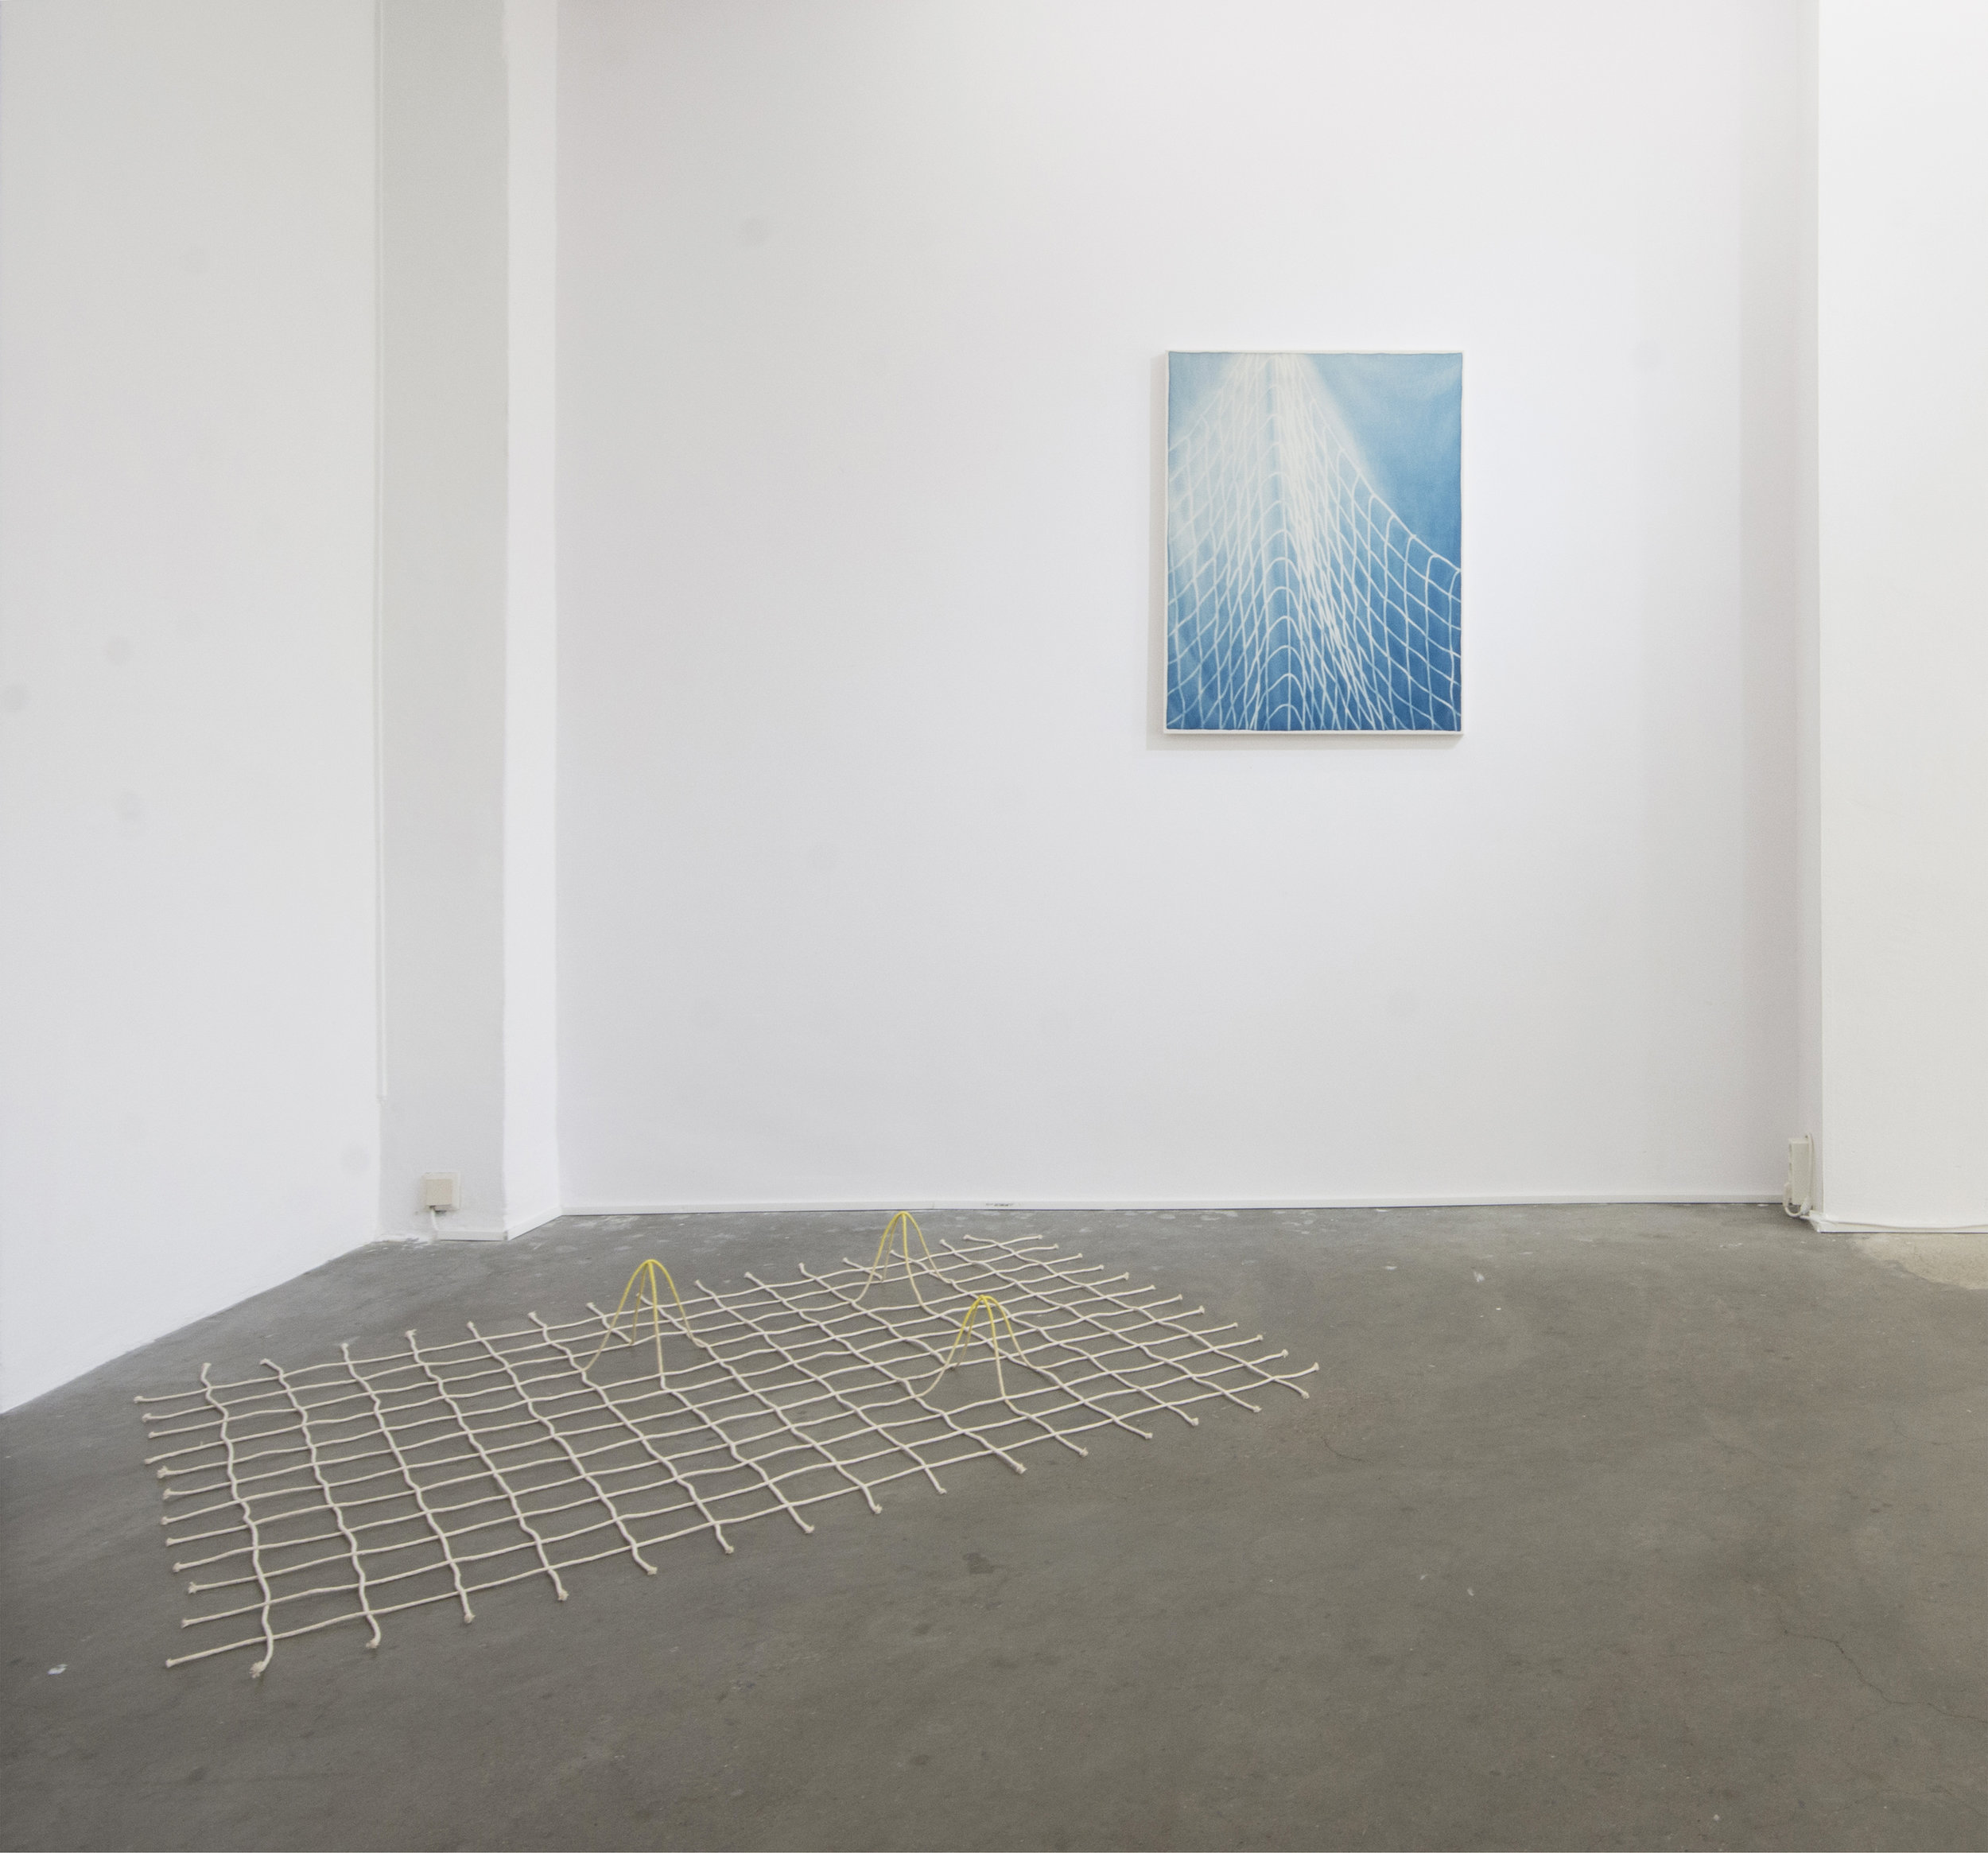 Nature of Particles (installation view at Albada Jelgersma Gallery), 2018